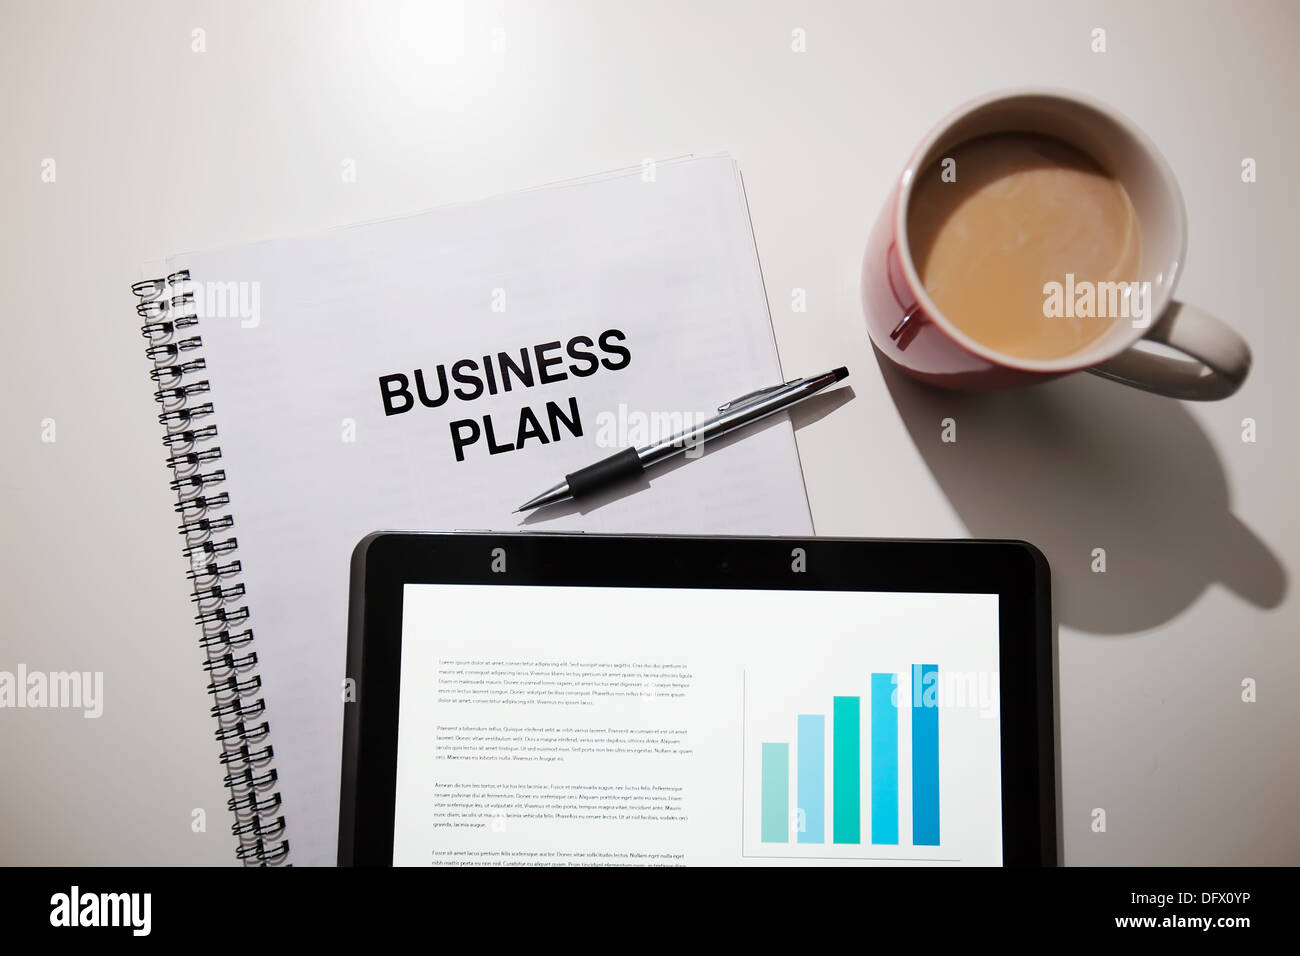 Business plan with touchscreen and coffee. Stock Photo